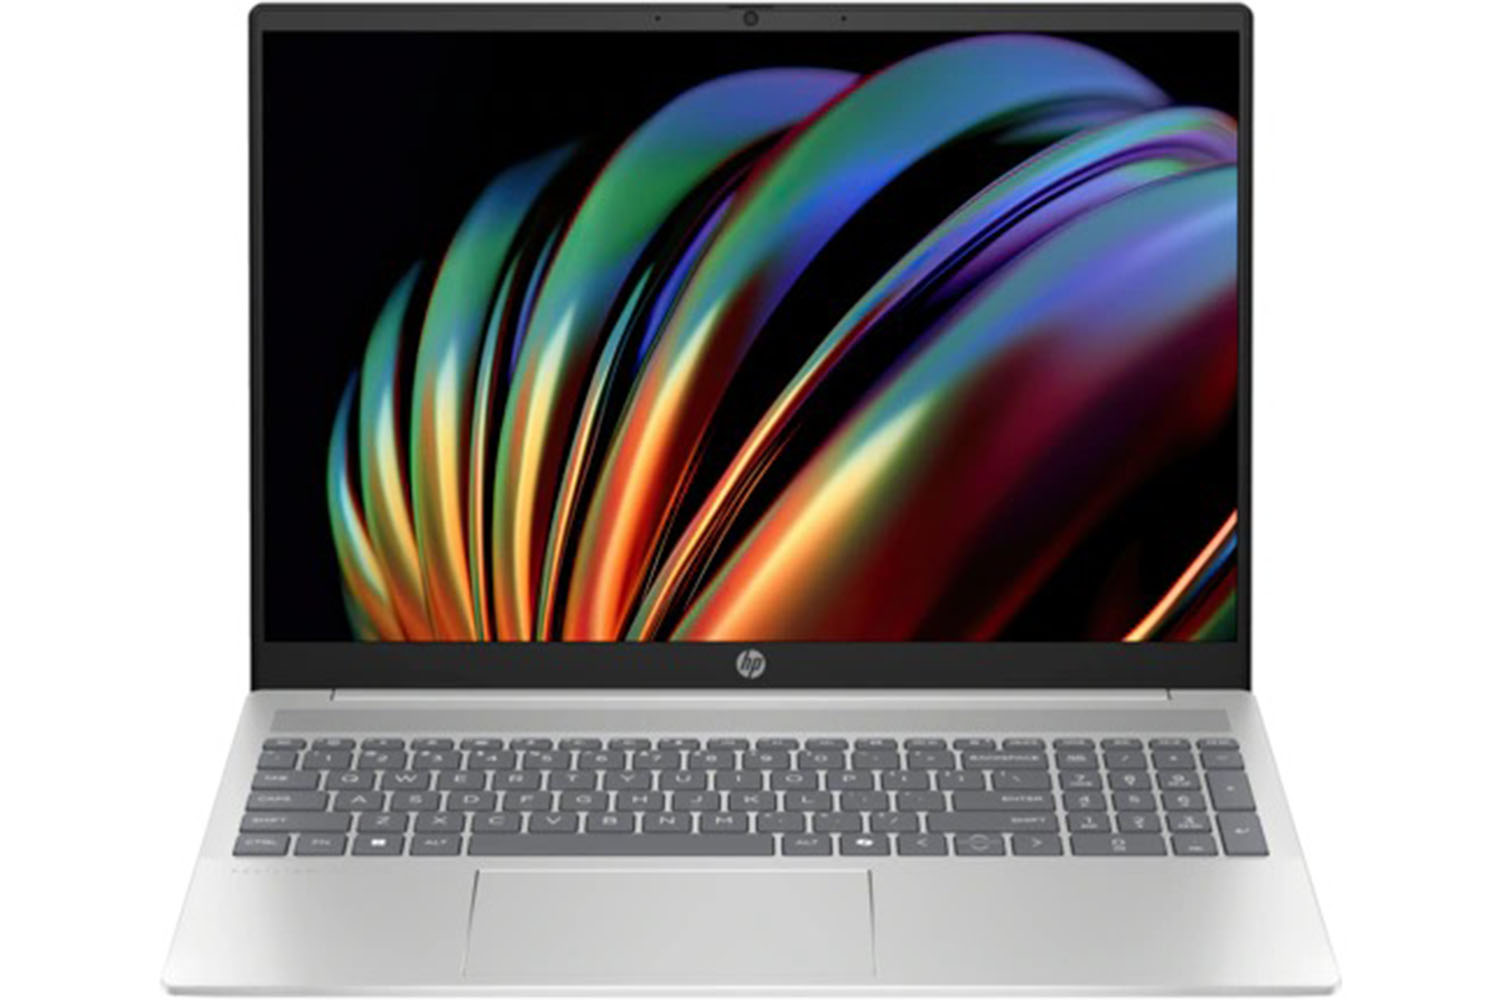 The HP Pavilion 16-inch laptop on a white background.